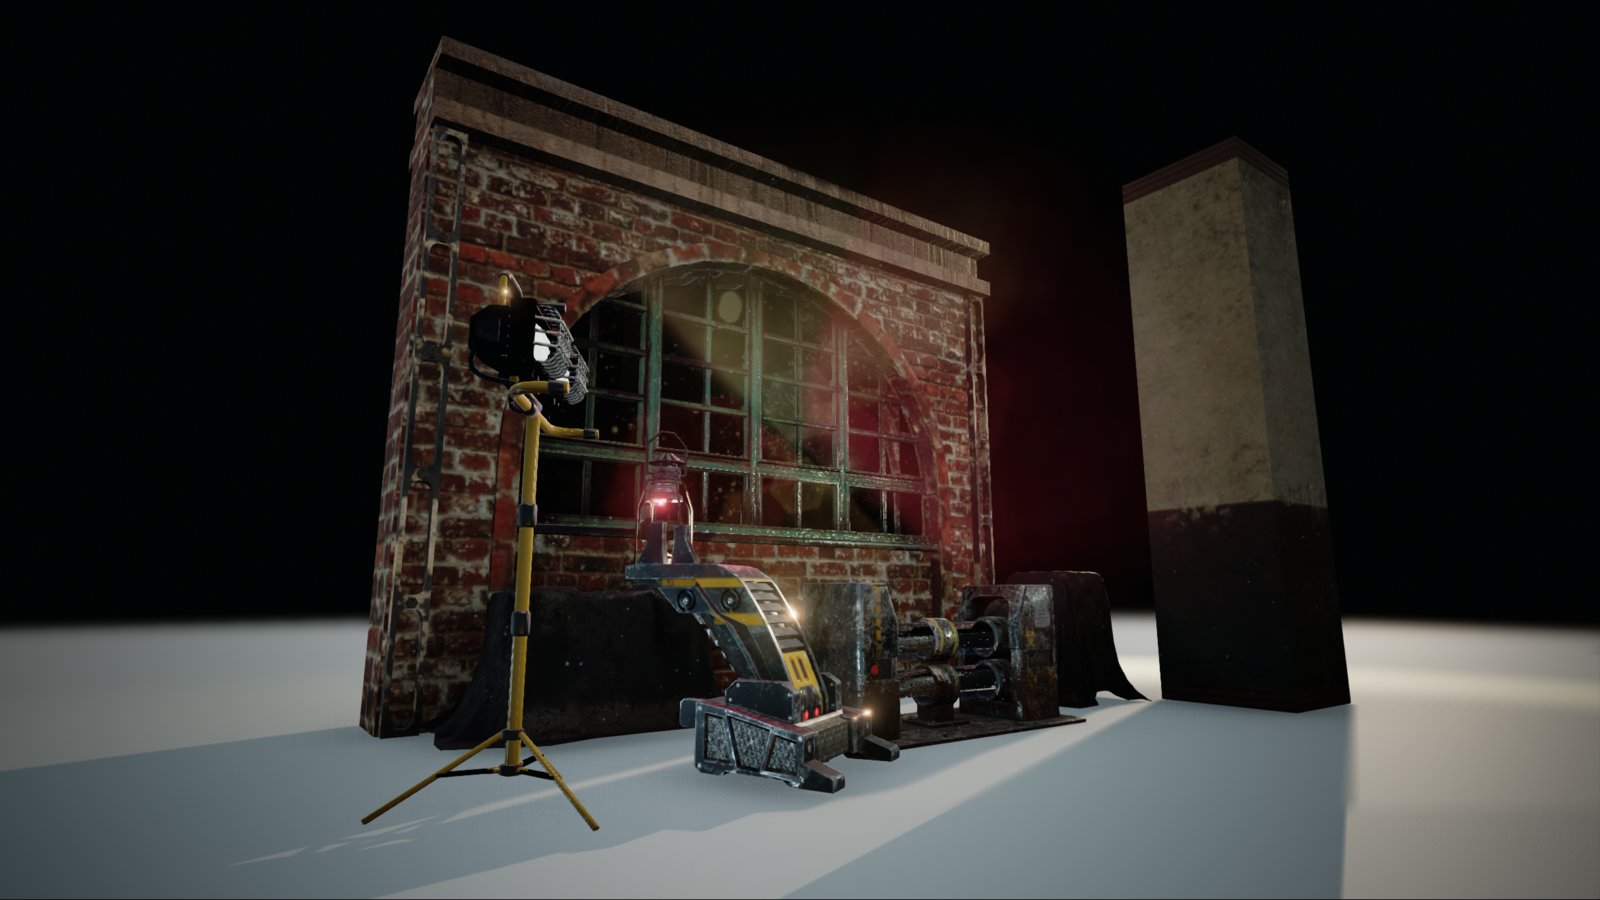 Abandoned Lab Diorama Scene Assets
Mix Of tilable and Non-tilable 2k Textures